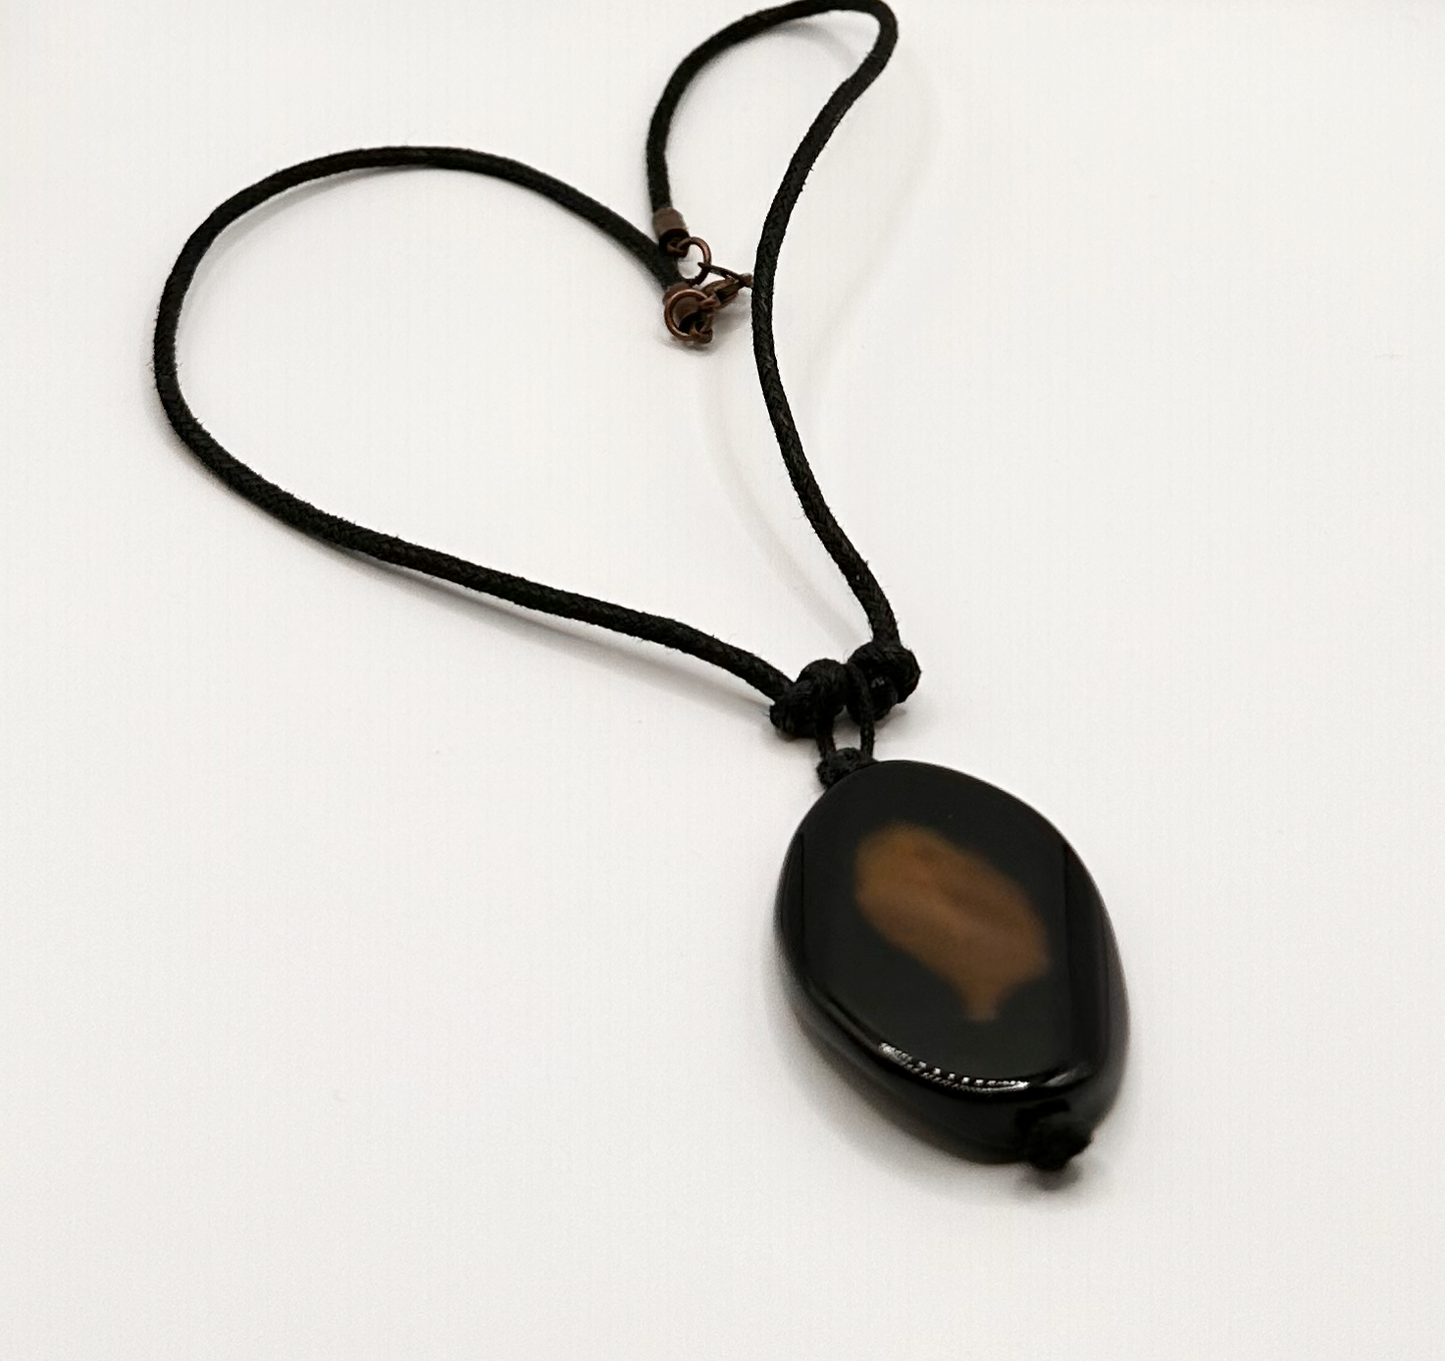 Polished Agate Stone Necklace on a Cotton Cord Necklace